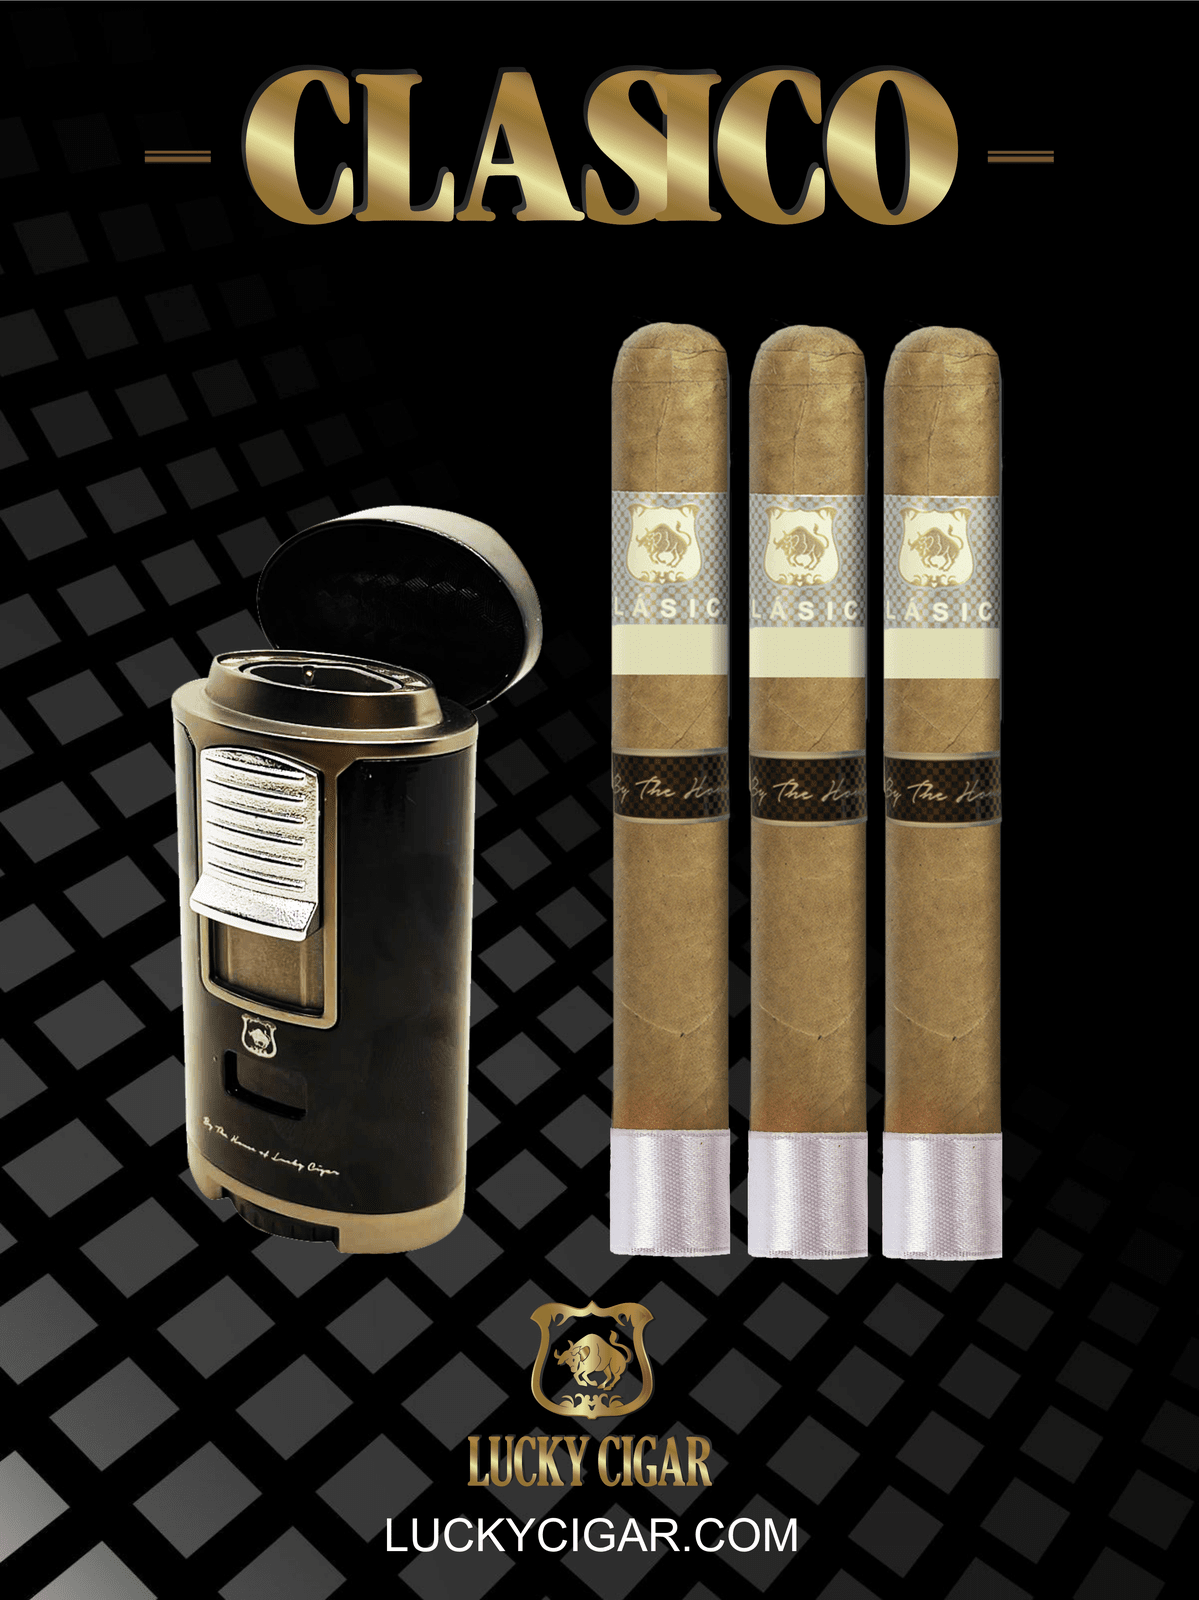 Classic Cigars - Classico by Lucky Cigar: Set of 3 Cigars, 3 Robusto with Lighter